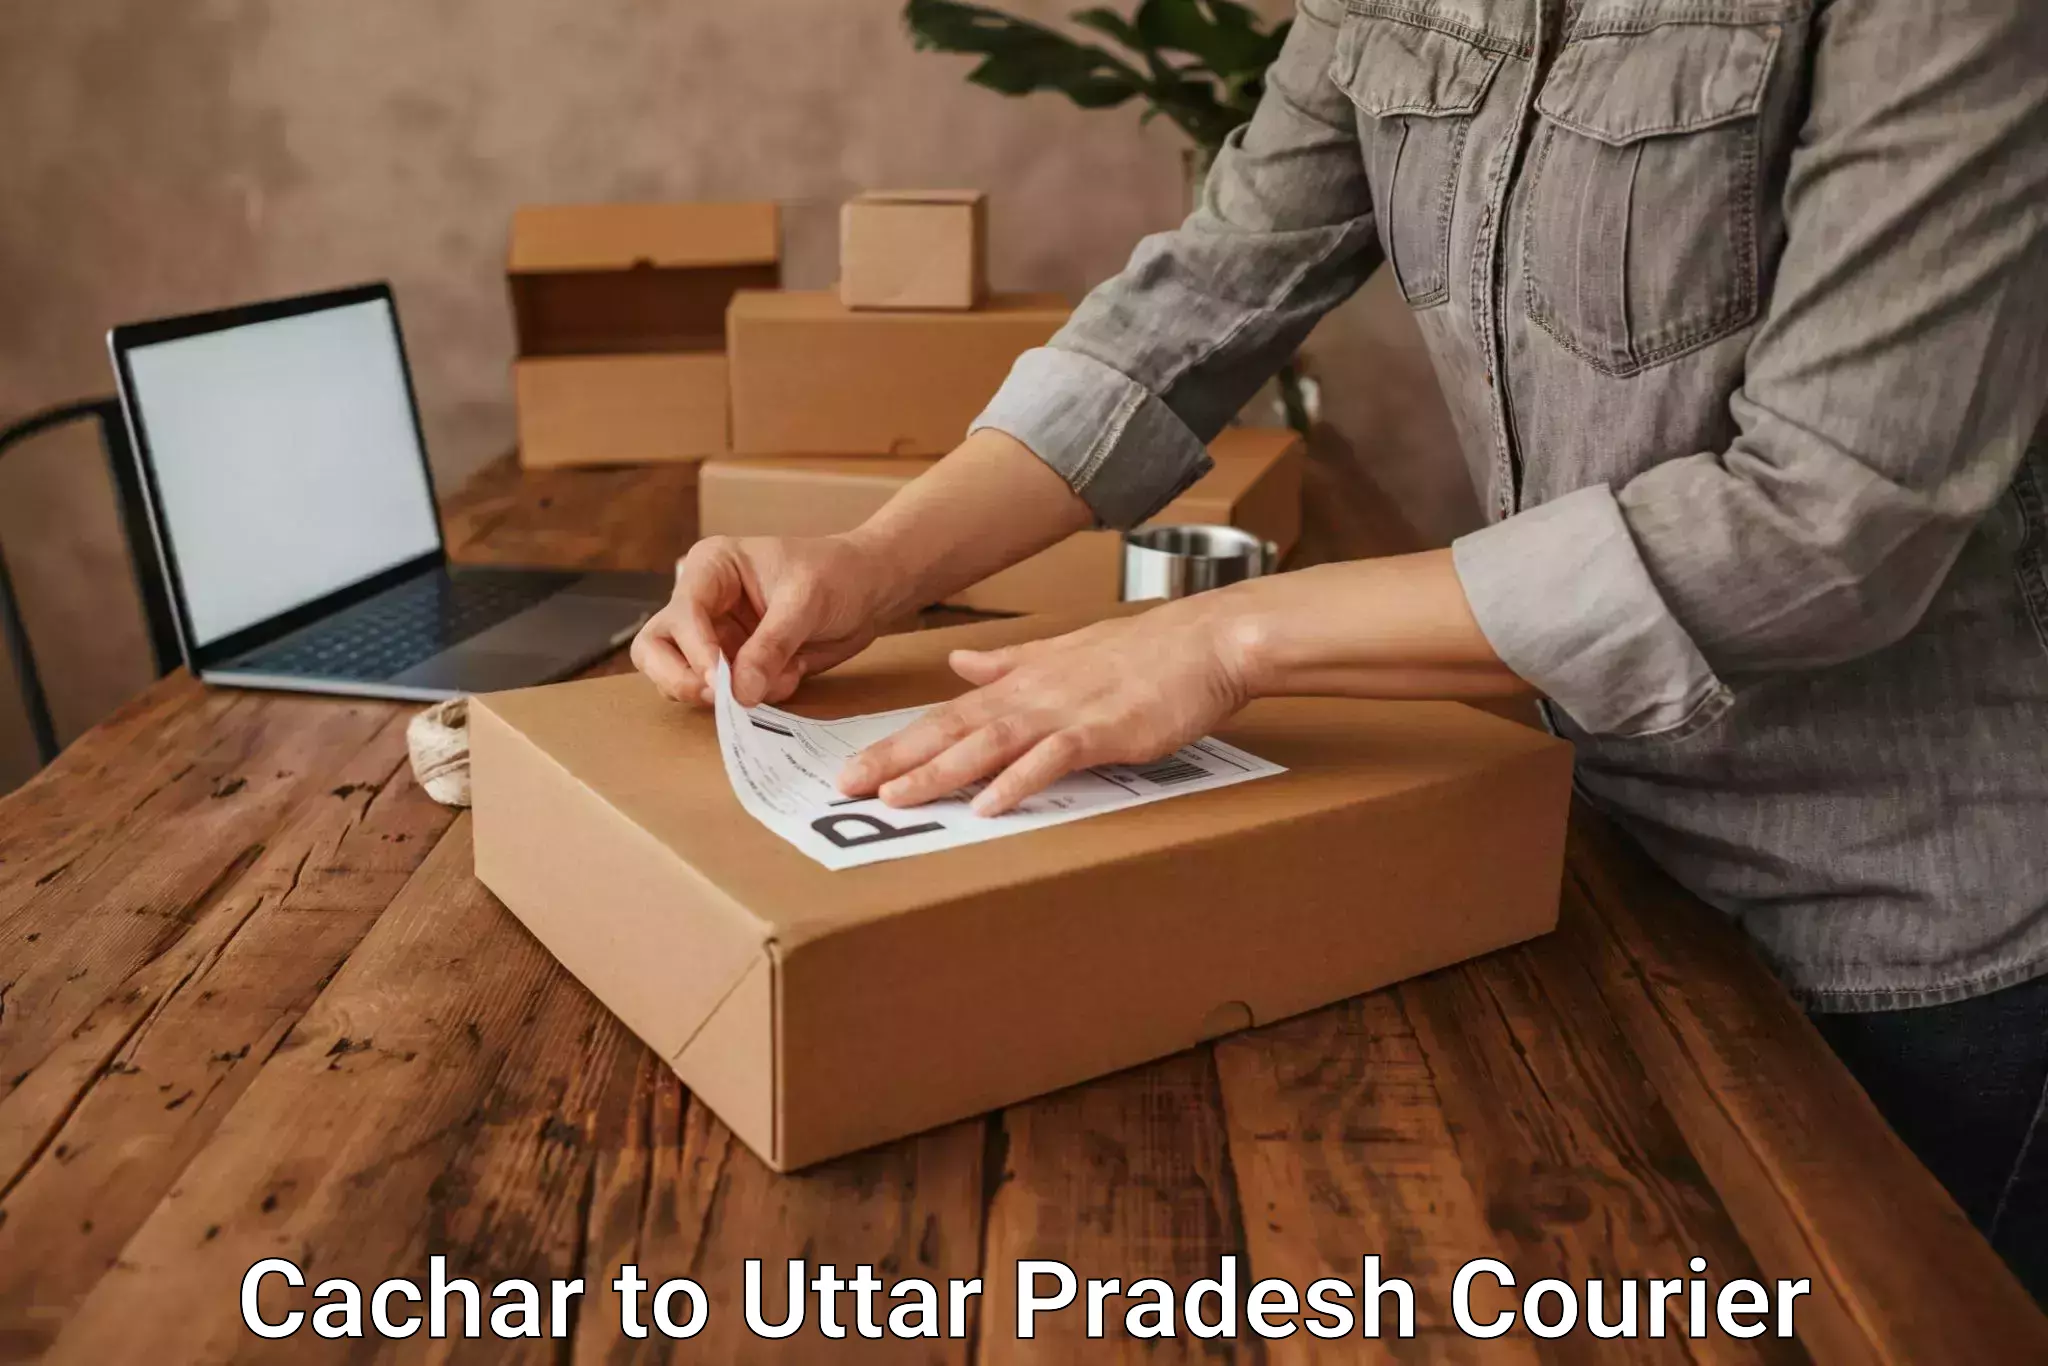 Package tracking in Cachar to Uttar Pradesh